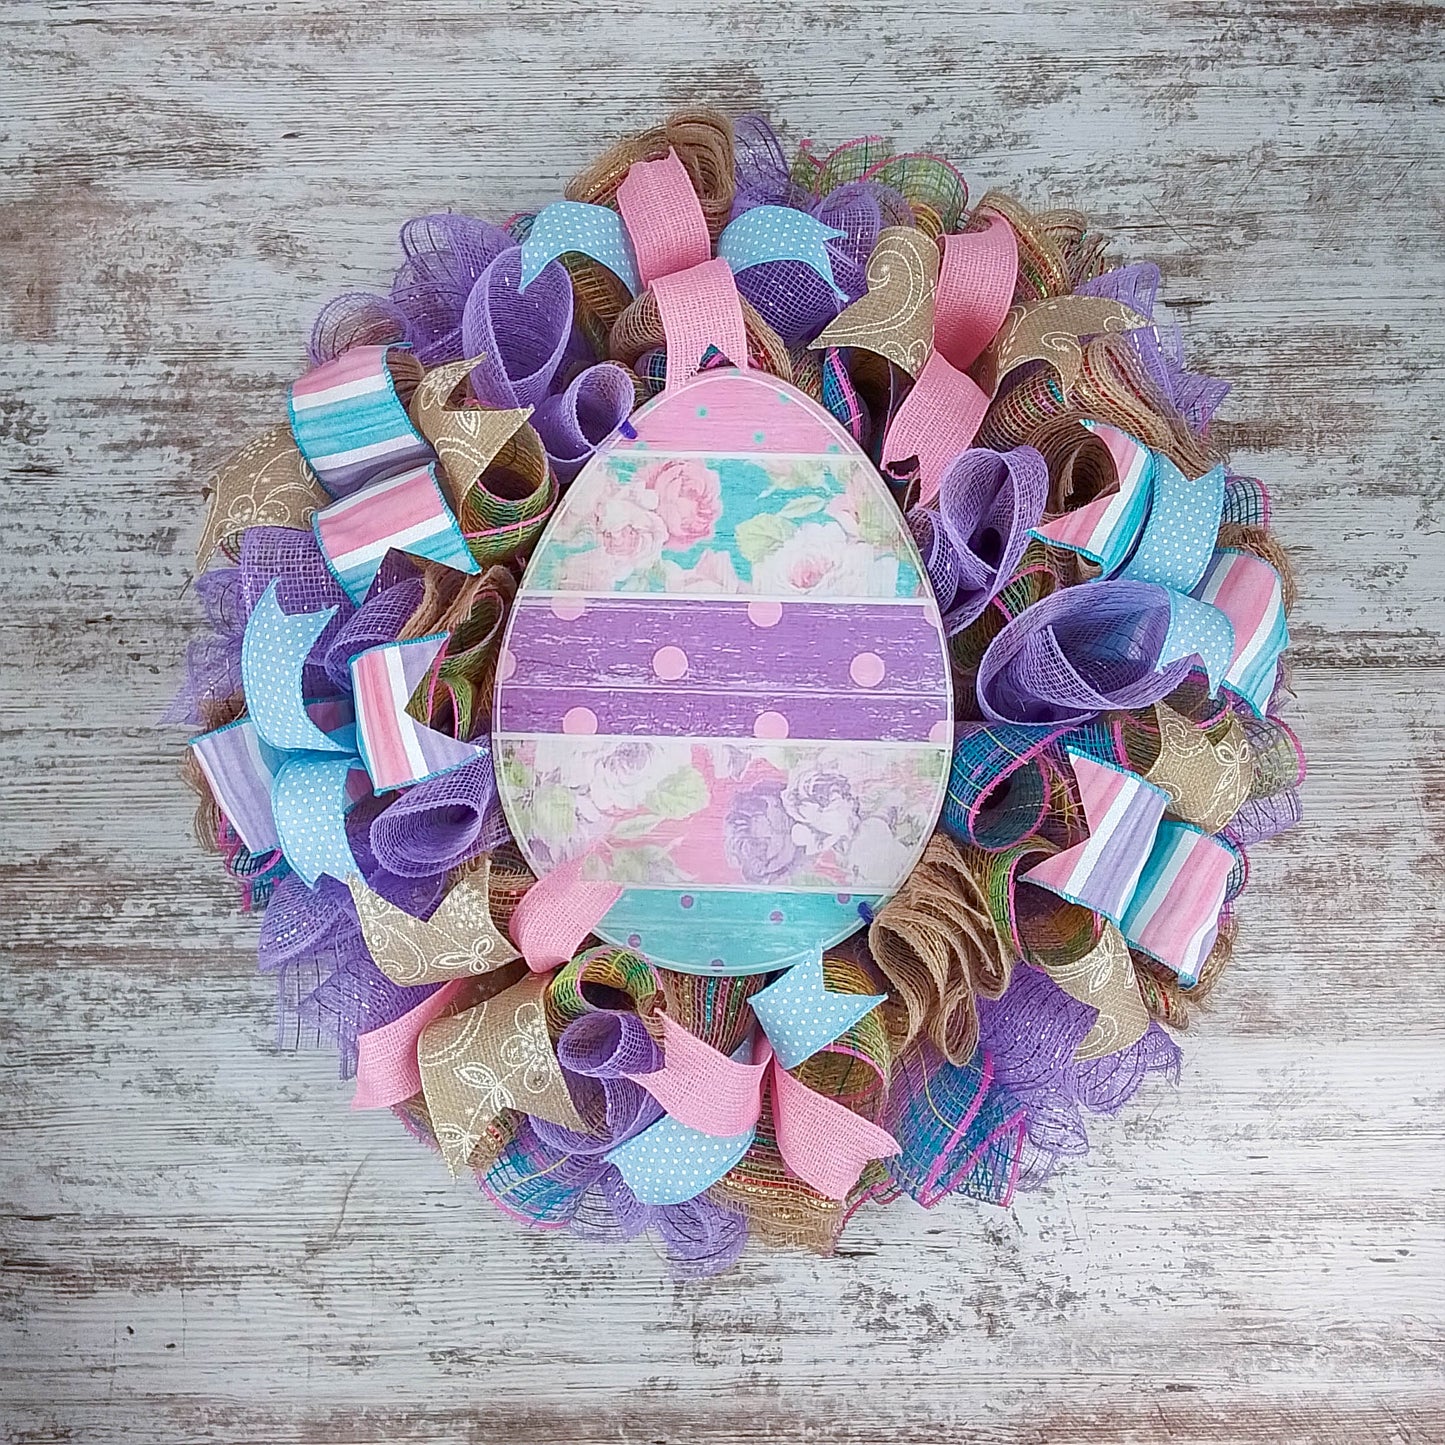 Happy Easter Wreaths for Front Door - Egg Decor - Purple Lavender Pink Yellow